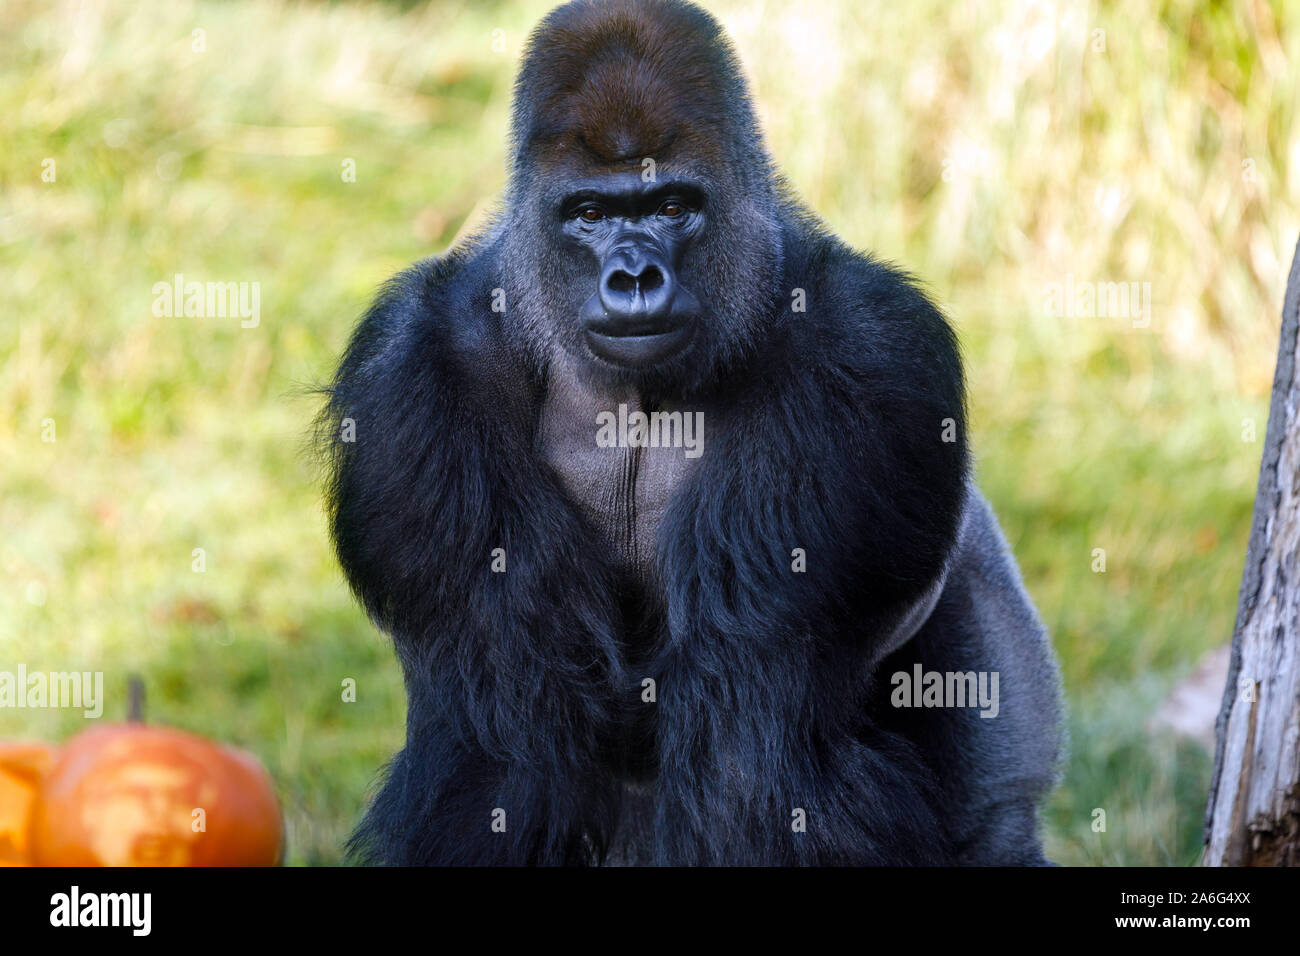 London, UK. 26th October 2019. Kumbuka, the impressive male silverback in ZSL London Zoos group of critically endangered Western-lowland gorillas dies, 25th October 2019.Photographed here, exactly a year ago, 25th October 2018, enjoying a Halloween treat of a giant pumpkin carved as Donald Trump. Kumbuka made headlines in 2016 when he famously escaped his enclosure, briefly exploring the zookeeper area next door to his den, where he opened and drank five litres of undiluted blackcurrant squash. He fathered a baby girl, Alika, his first offspring with mate Mjukuu in 2014 and a male, Ger Stock Photo